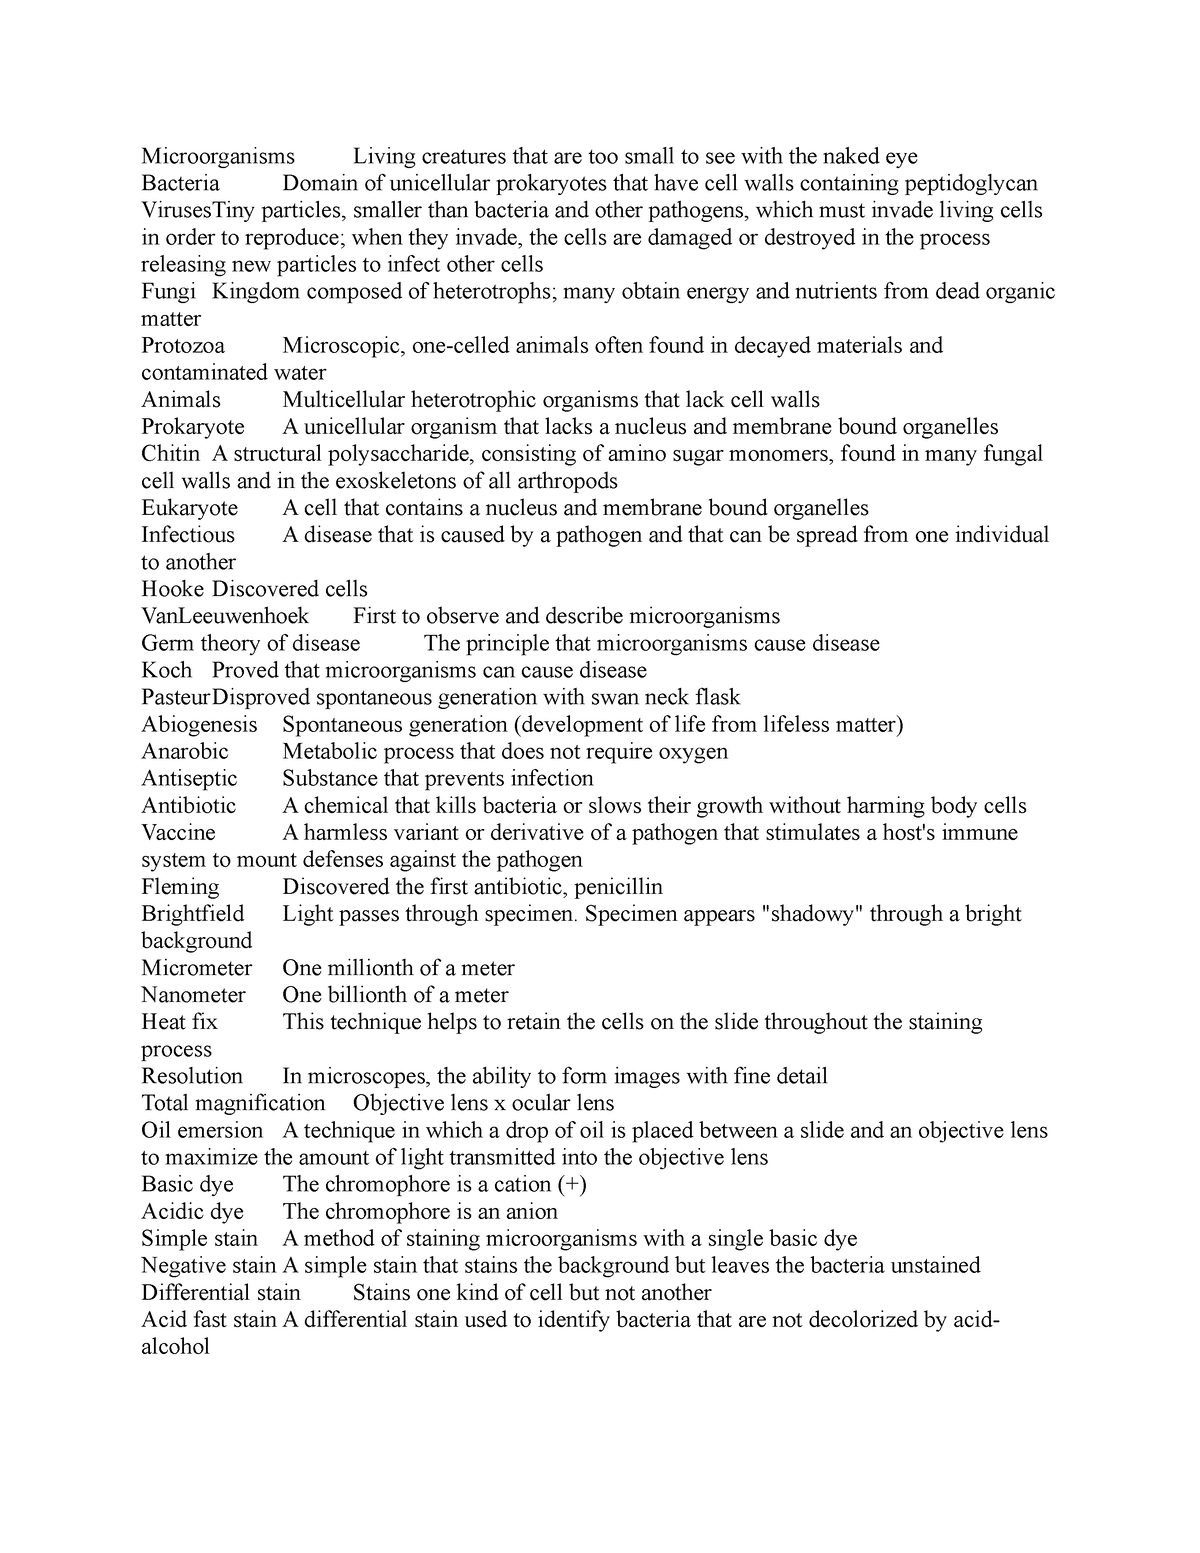 Microbiology Exam One Vocab - Microorganisms Living creatures that are ...